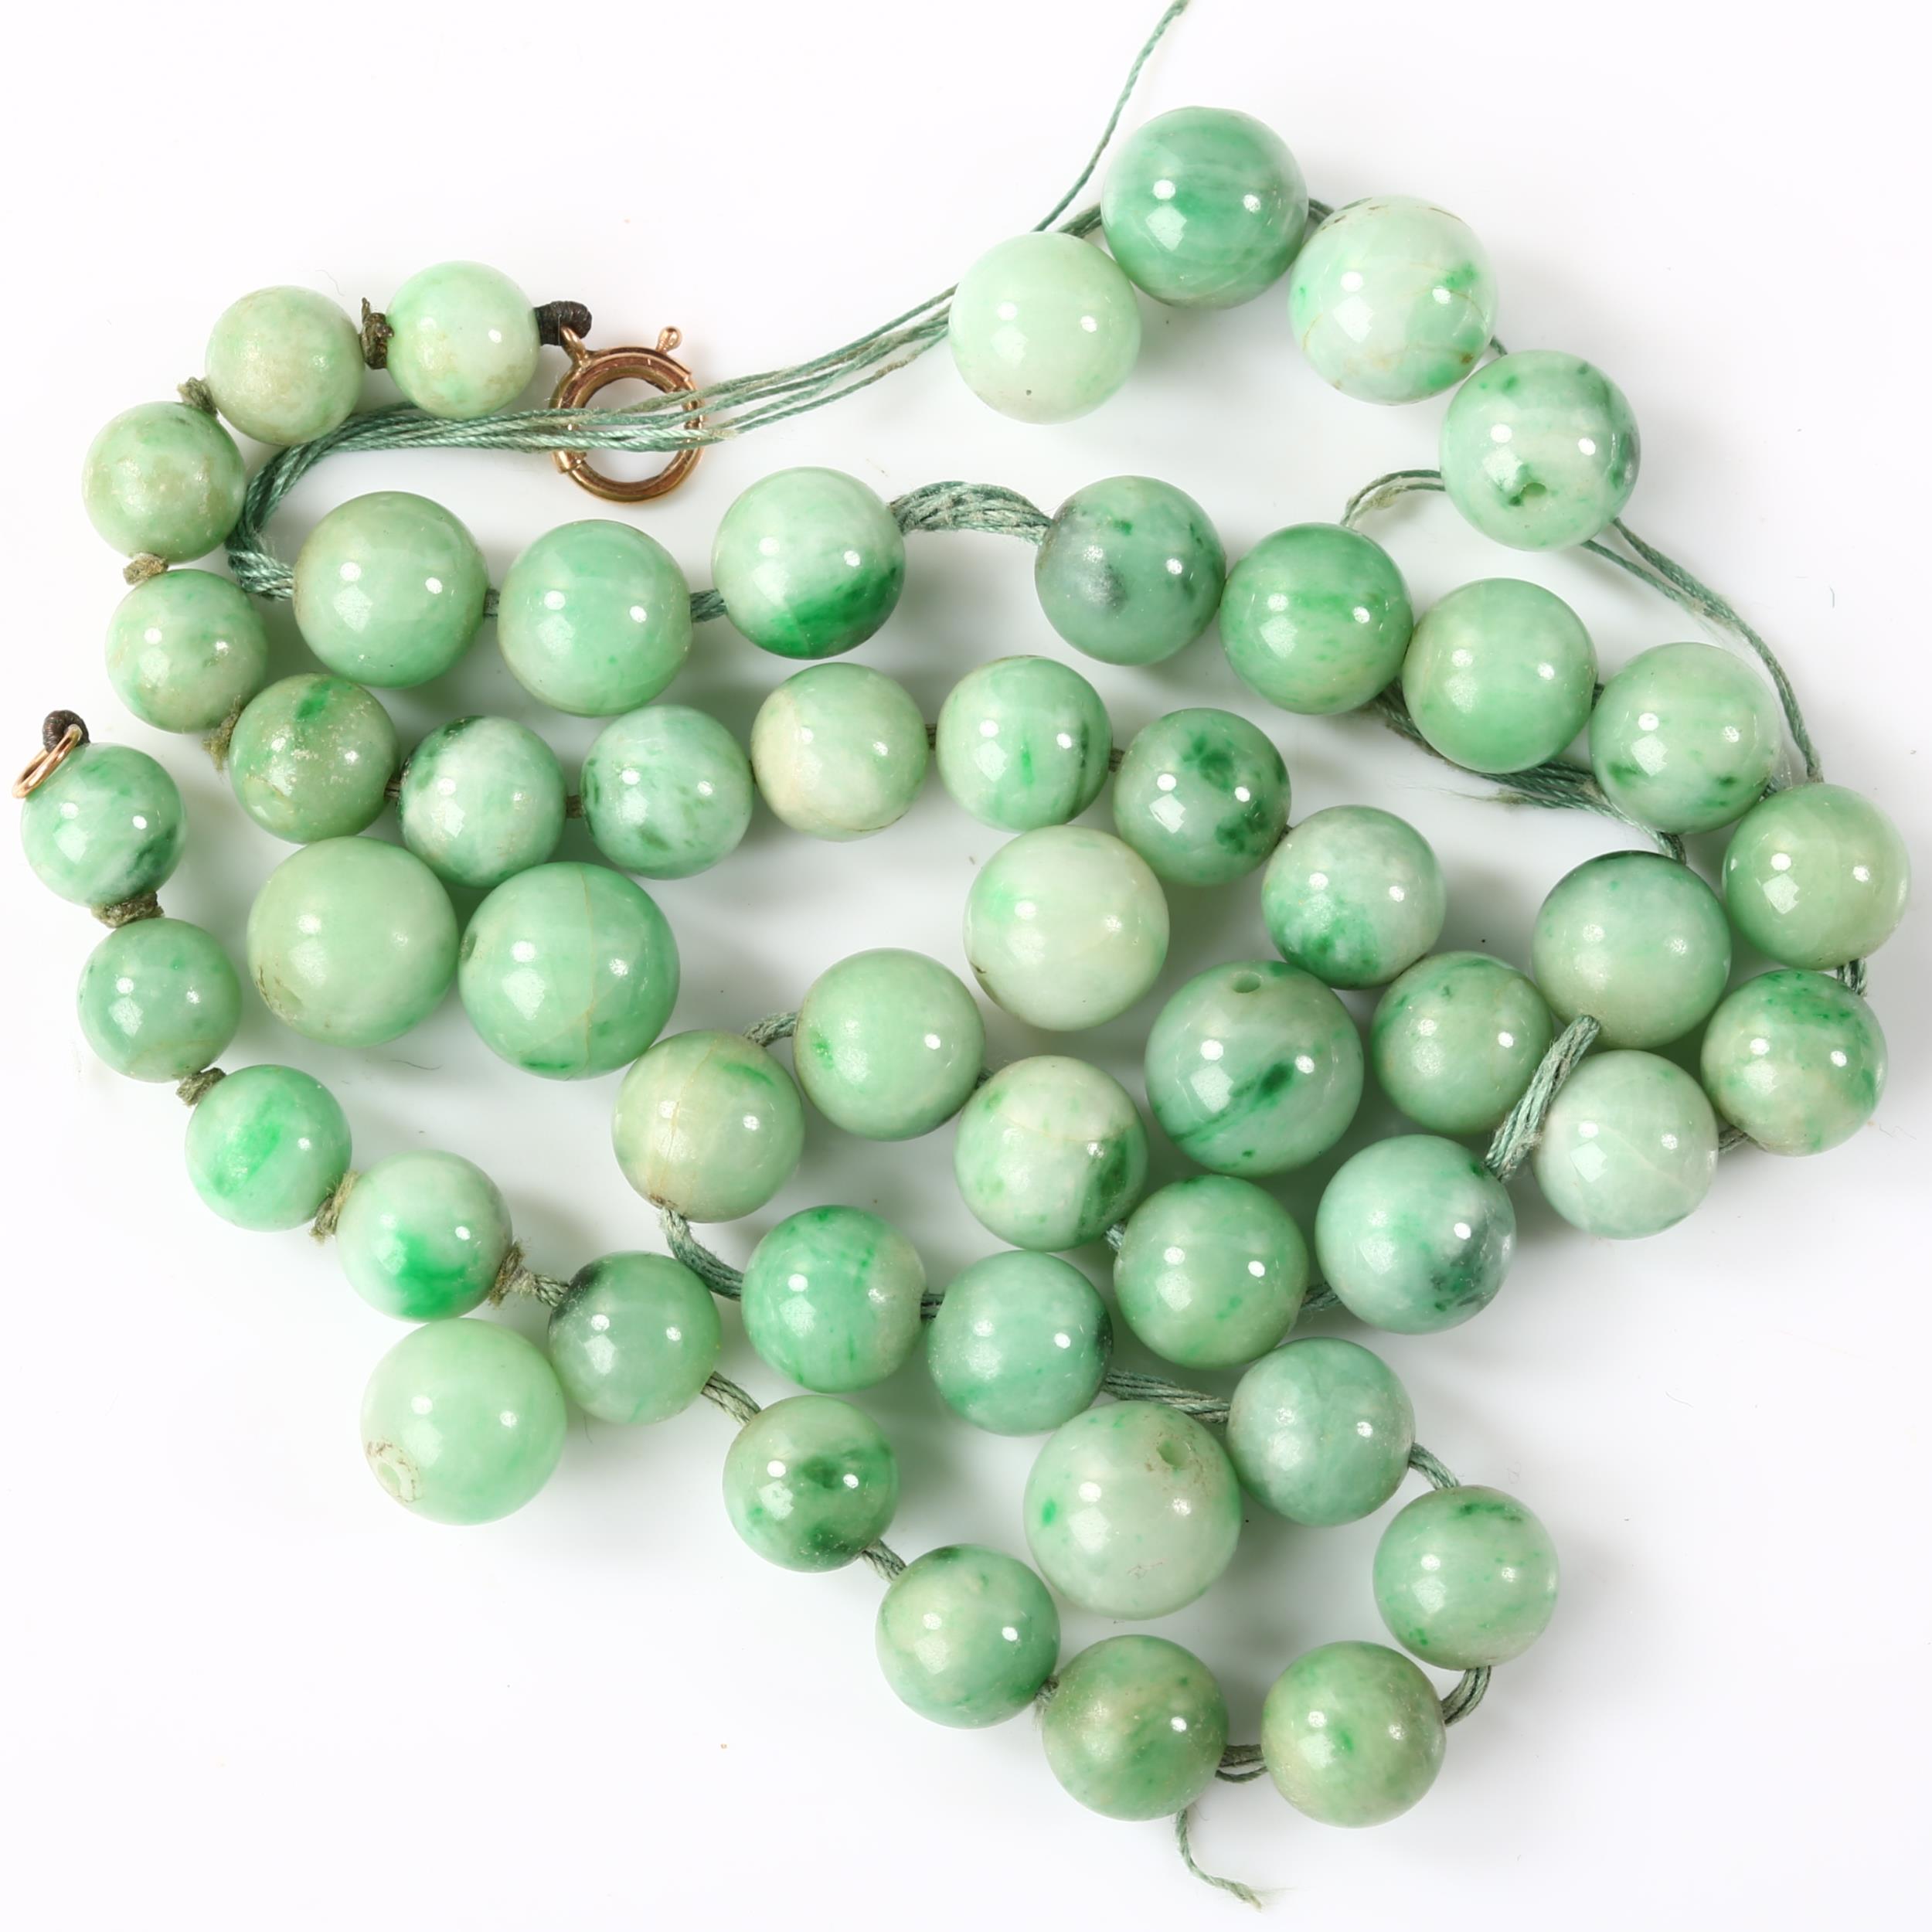 A group of graduated polished jade beads, sizes ranging from 7.04mm - 9.72mm, 49.9g total